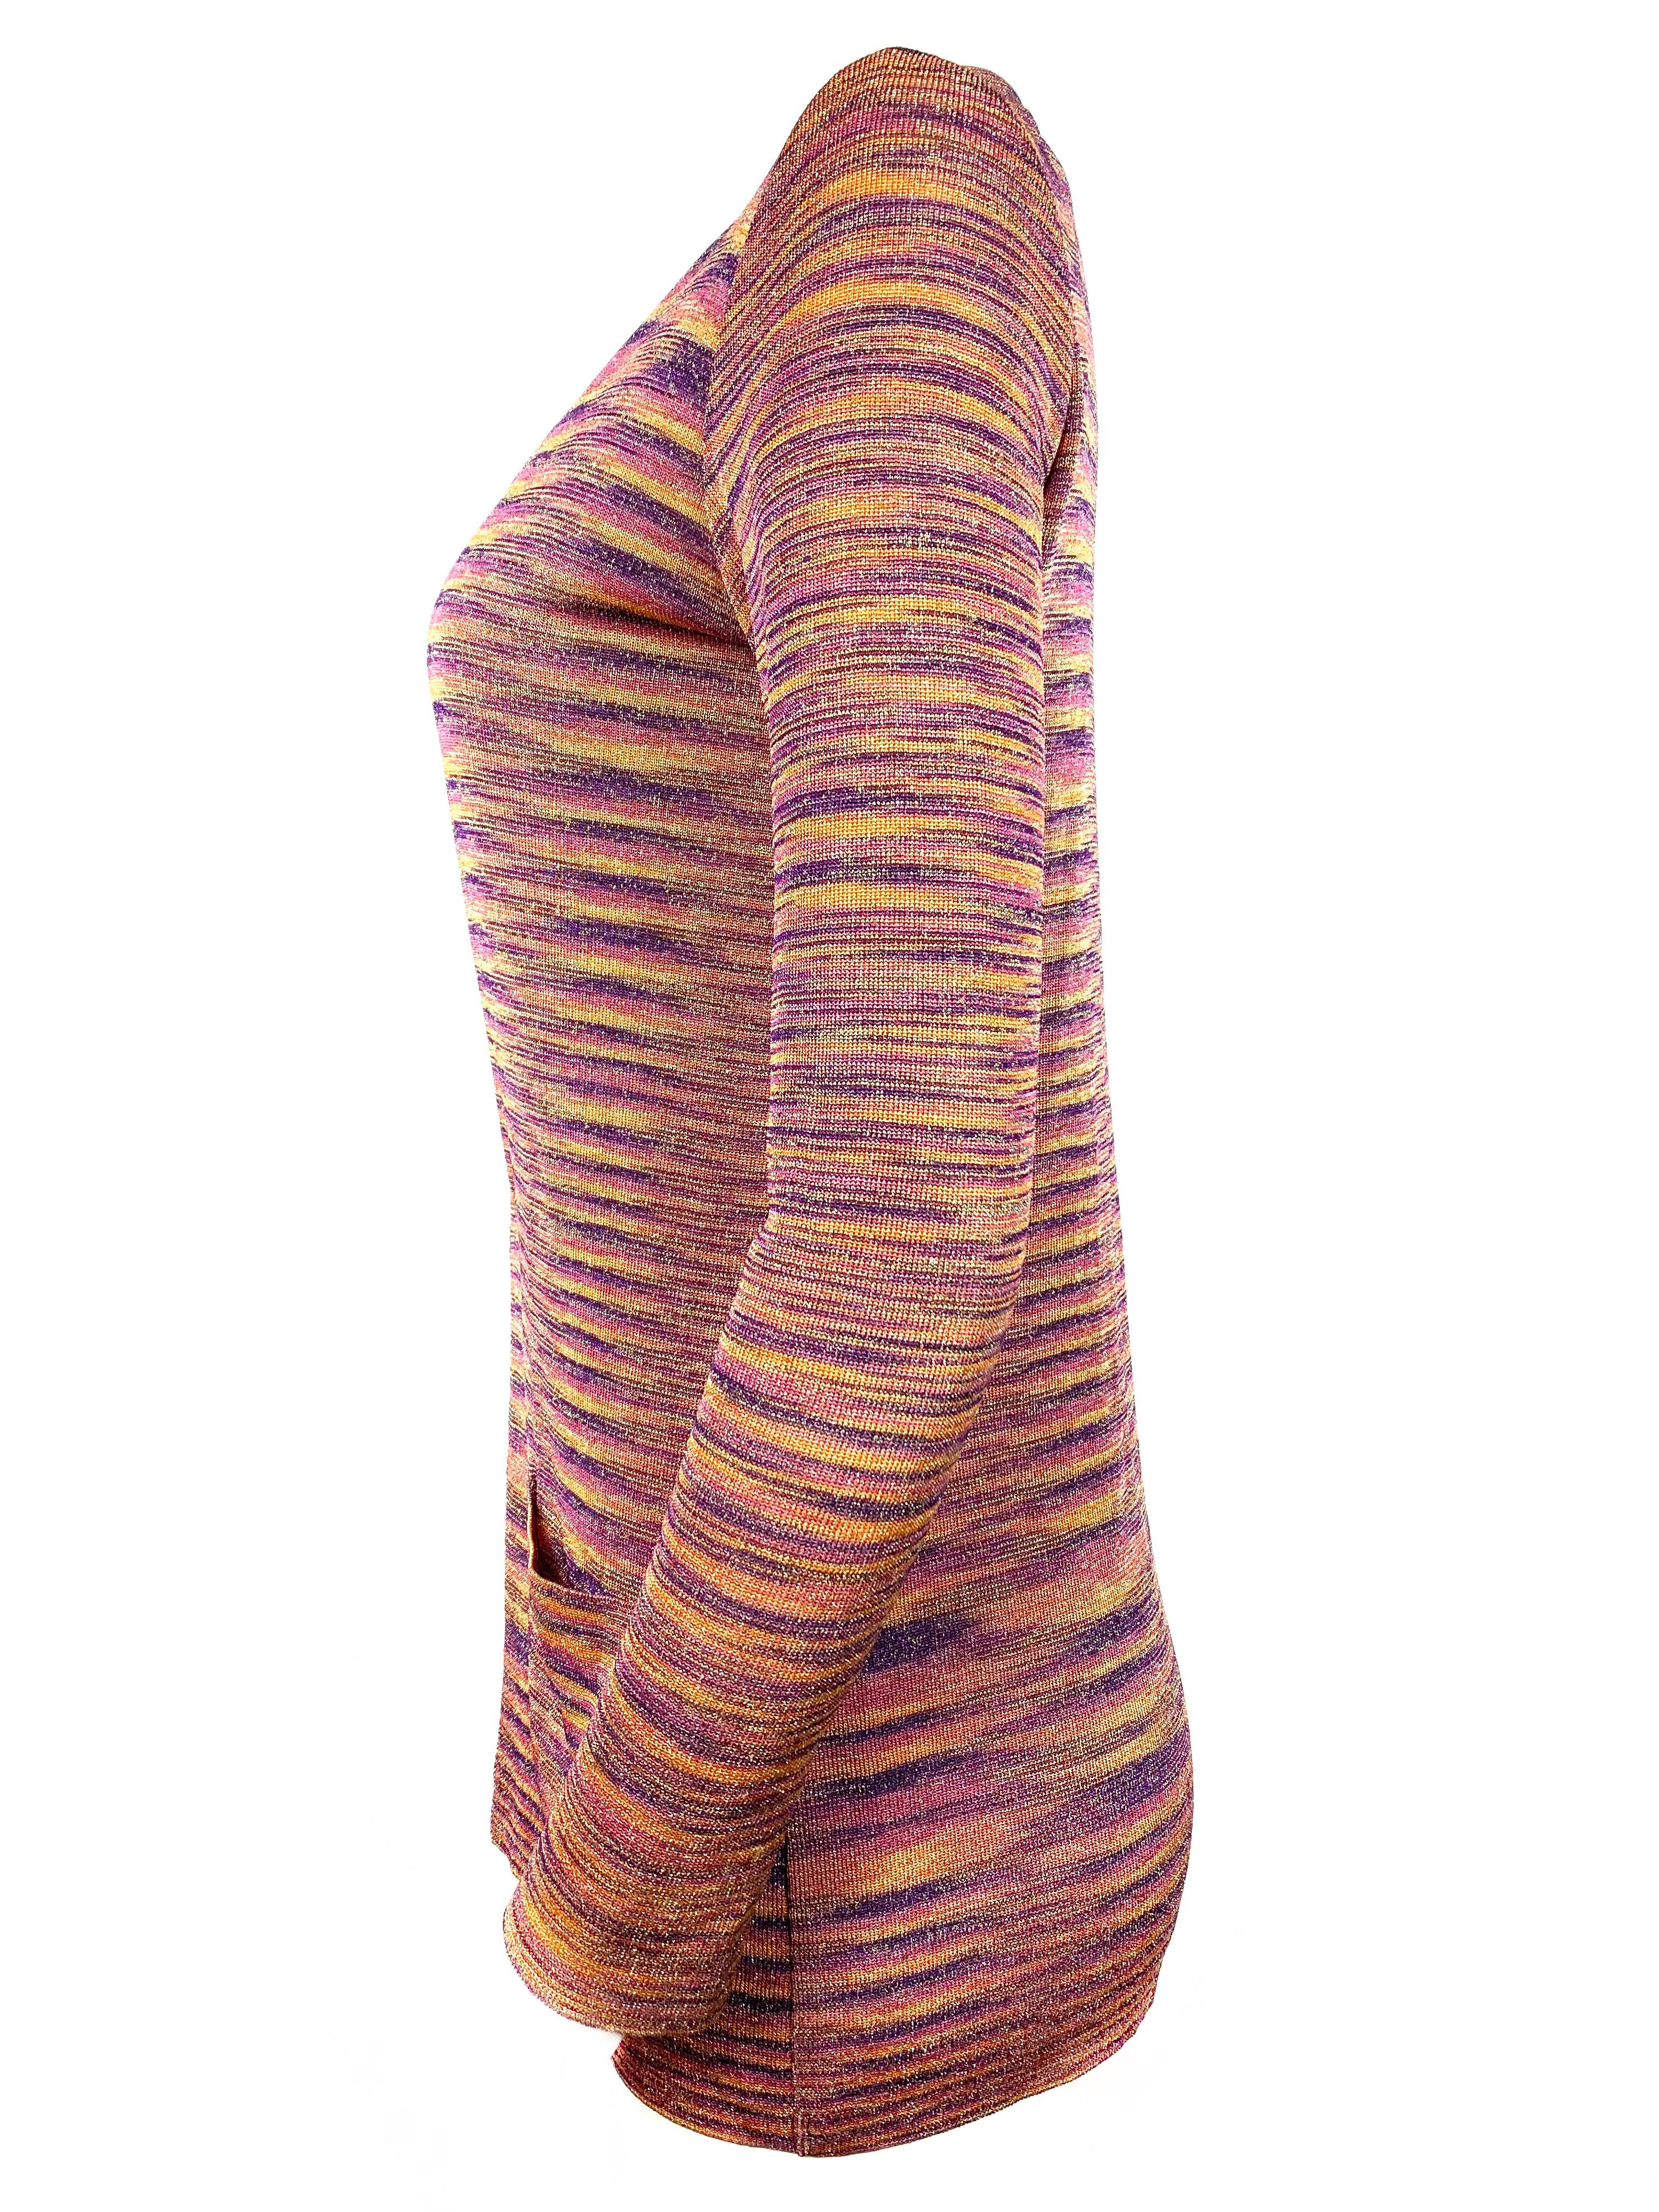 Brown Missoni Multicolor Knit Sleeveless Top and Cardigan Set Size 40 For Sale